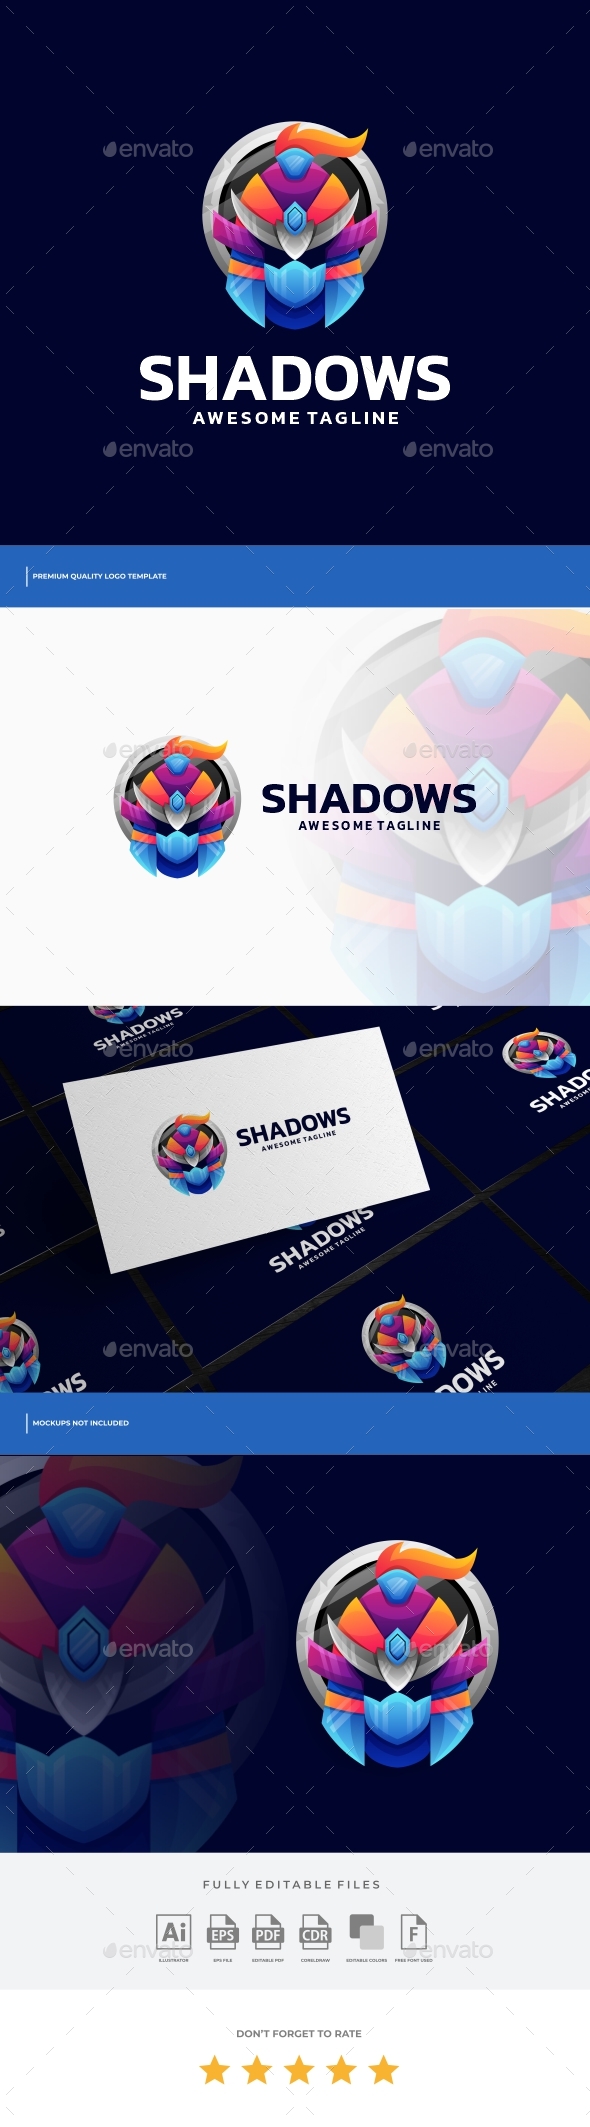 [DOWNLOAD]Shadows Warrior Gradient Colorful Logo Template